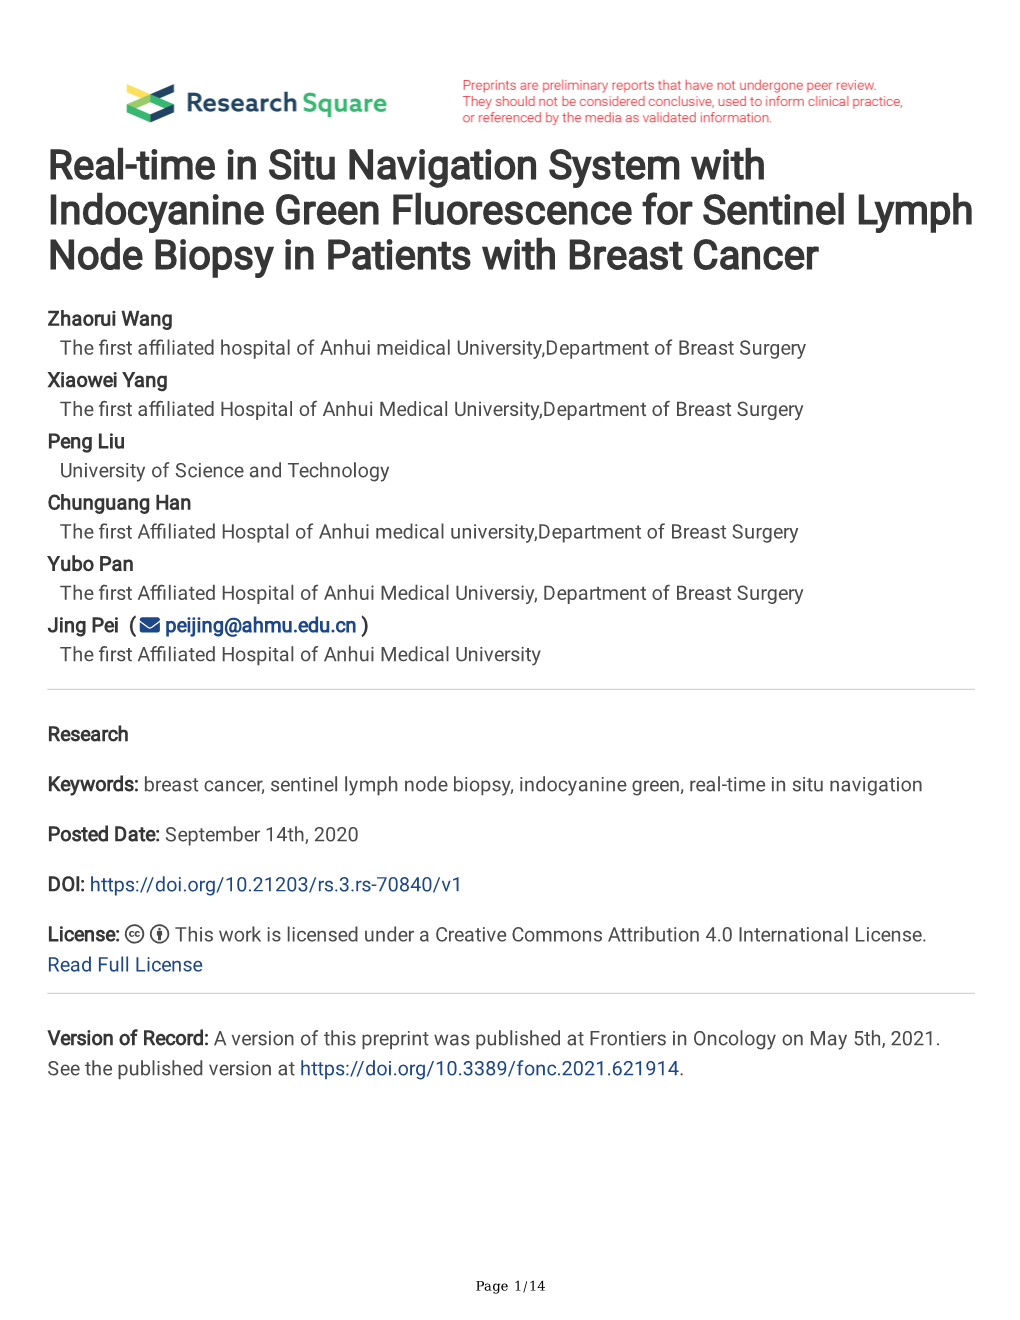 Real-Time in Situ Navigation System with Indocyanine Green Fluorescence for Sentinel Lymph Node Biopsy in Patients with Breast Cancer